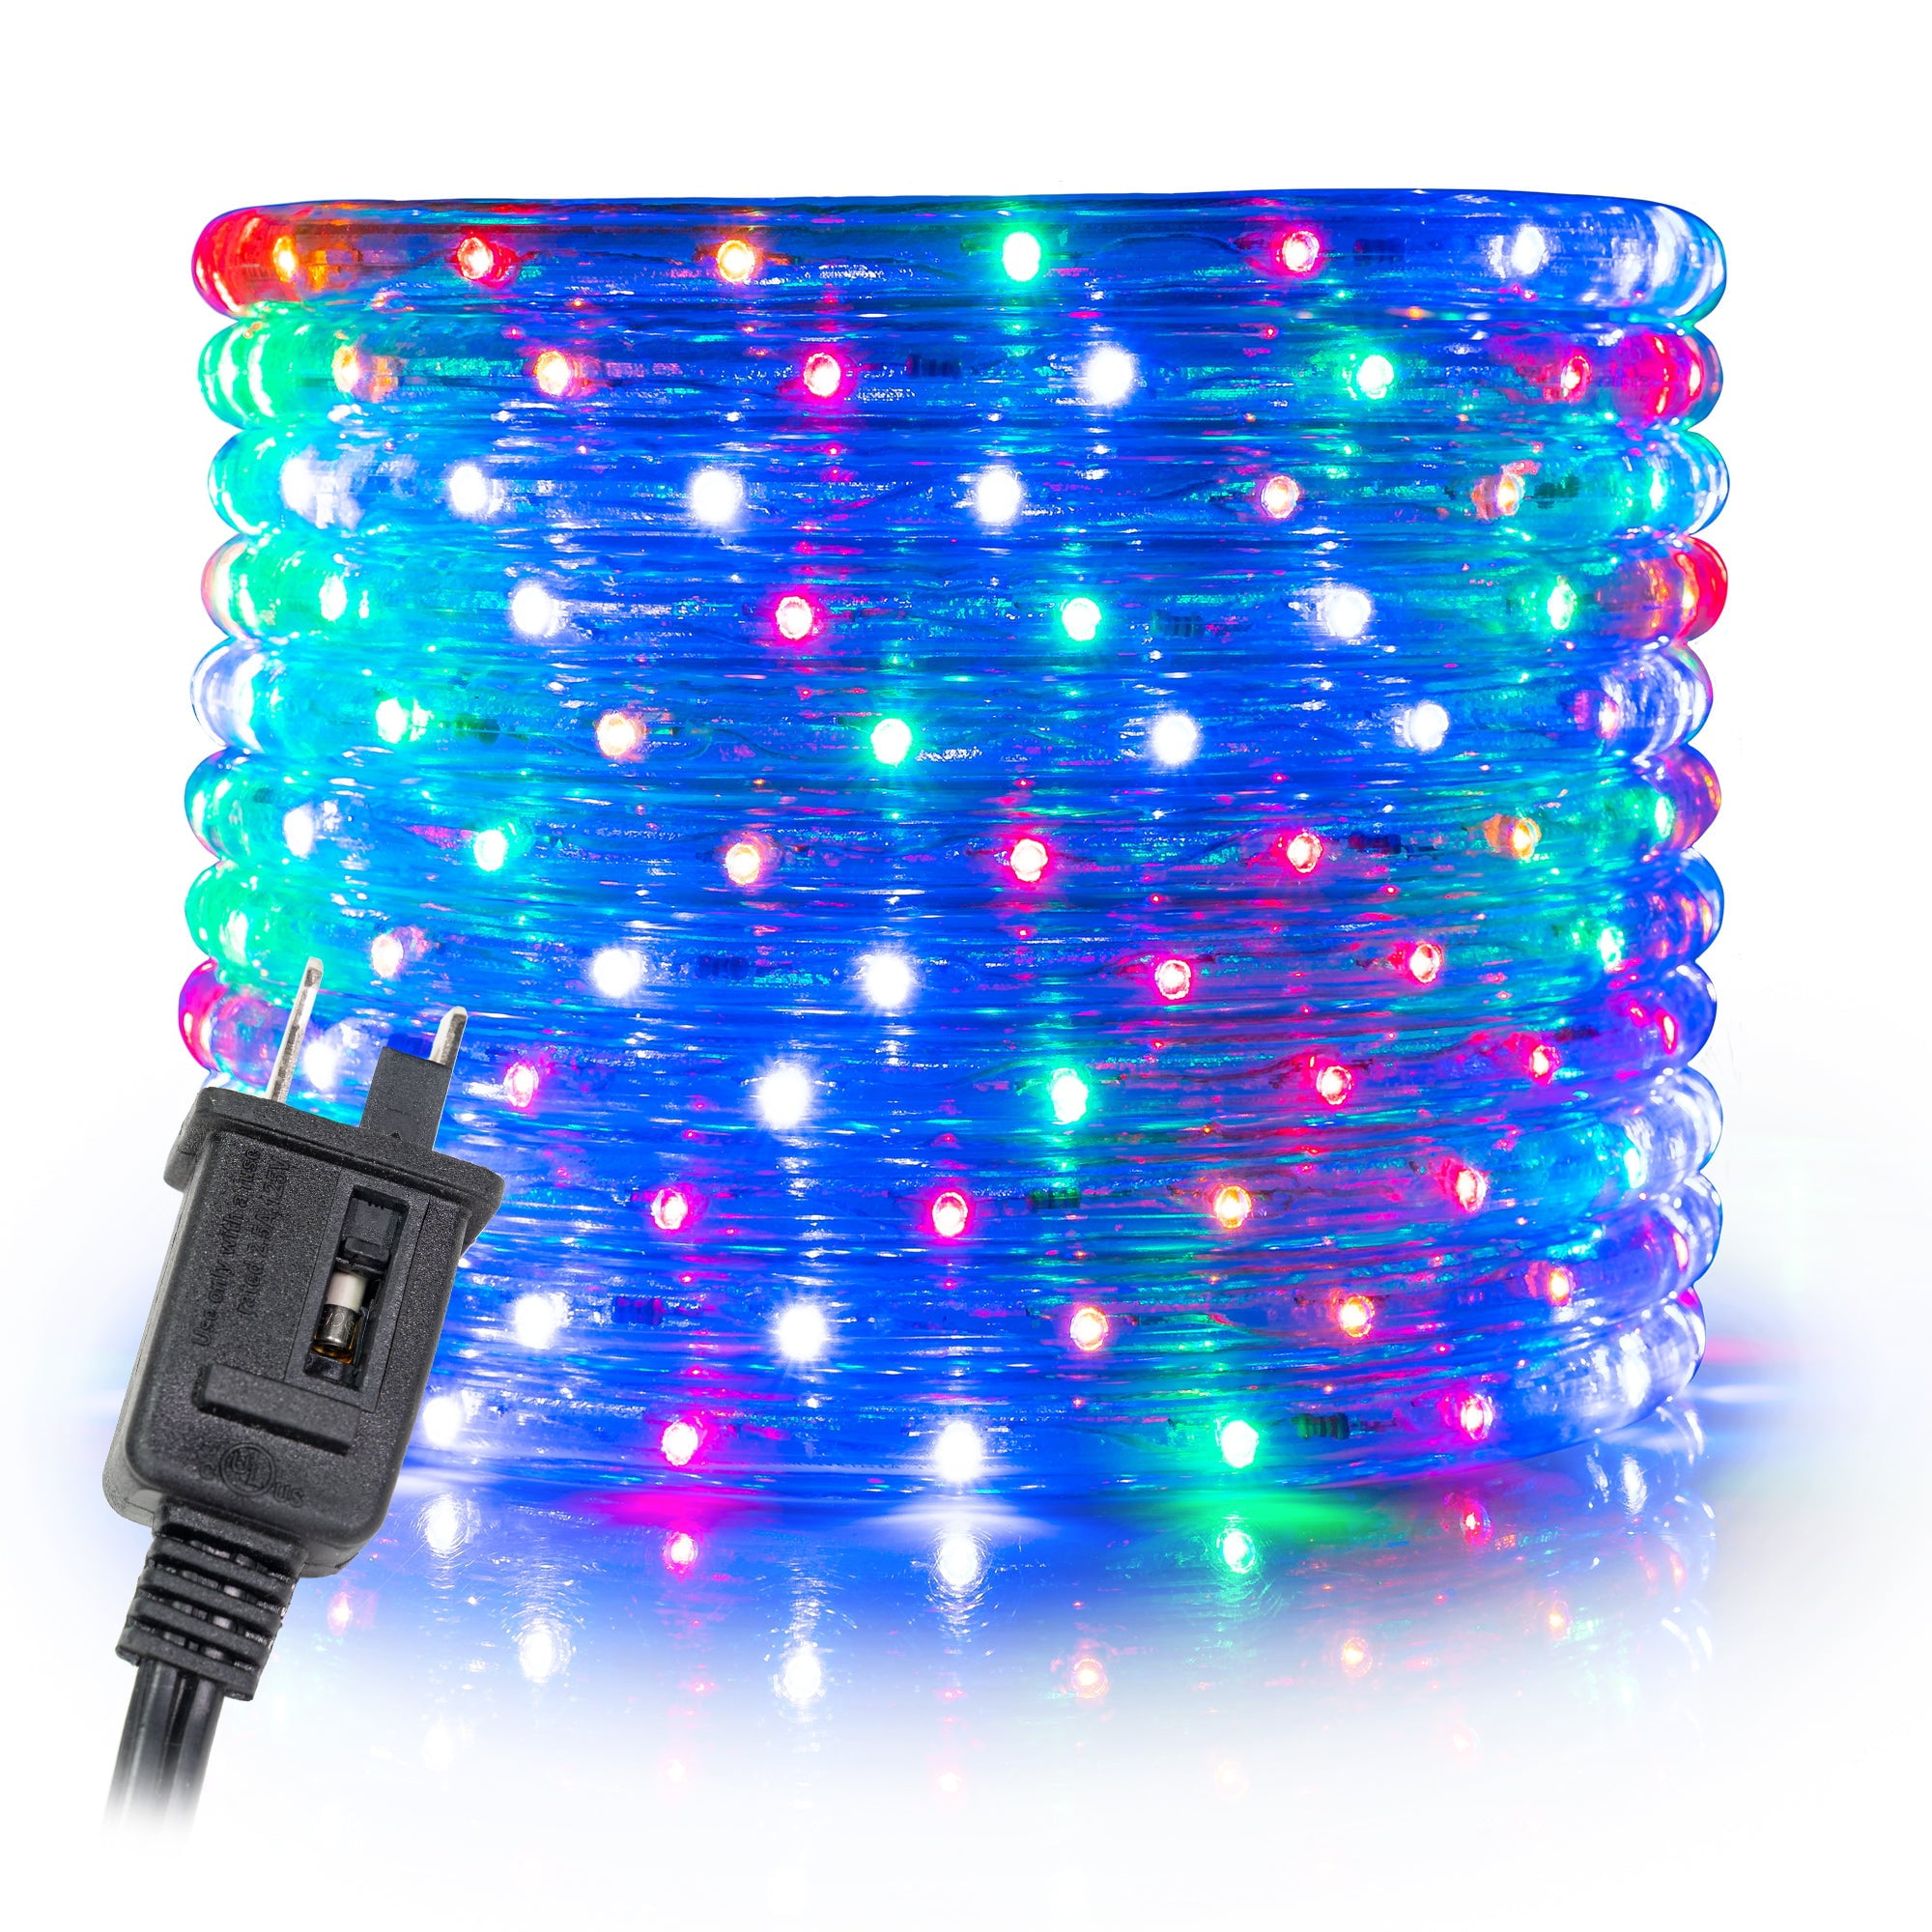 Details about   清 33Ft/10M LED Rope Strip Light Multi-Color Outdoor Changing  Remote Waterproof